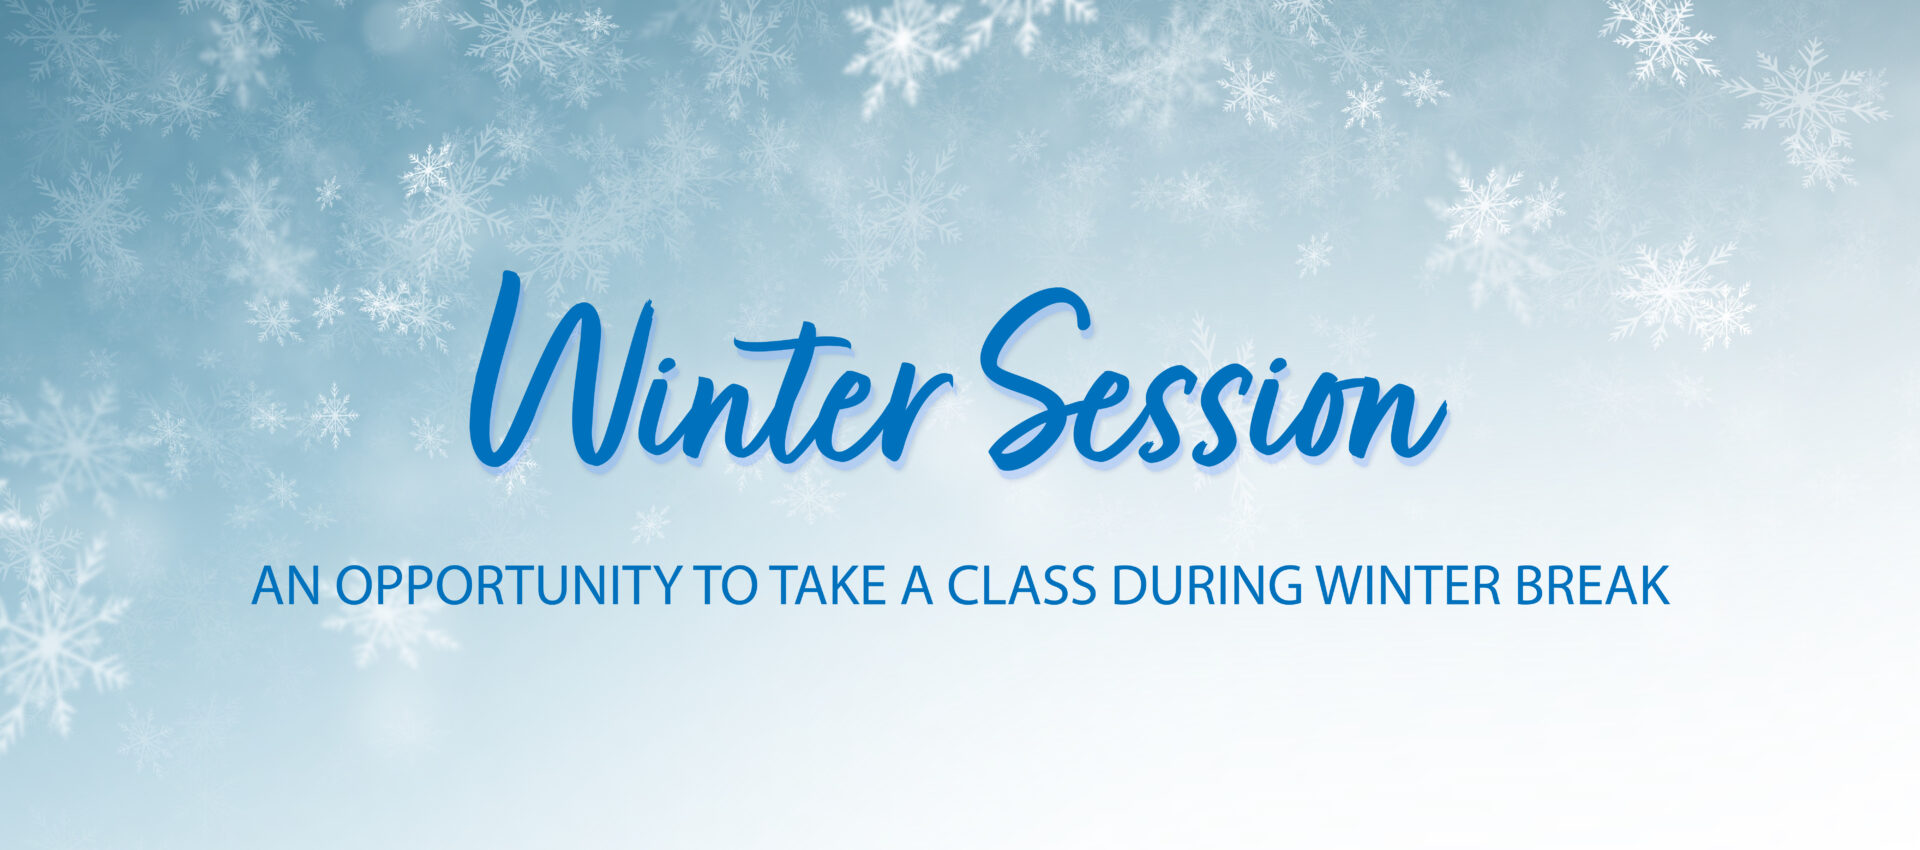 Winter Session at JWCC